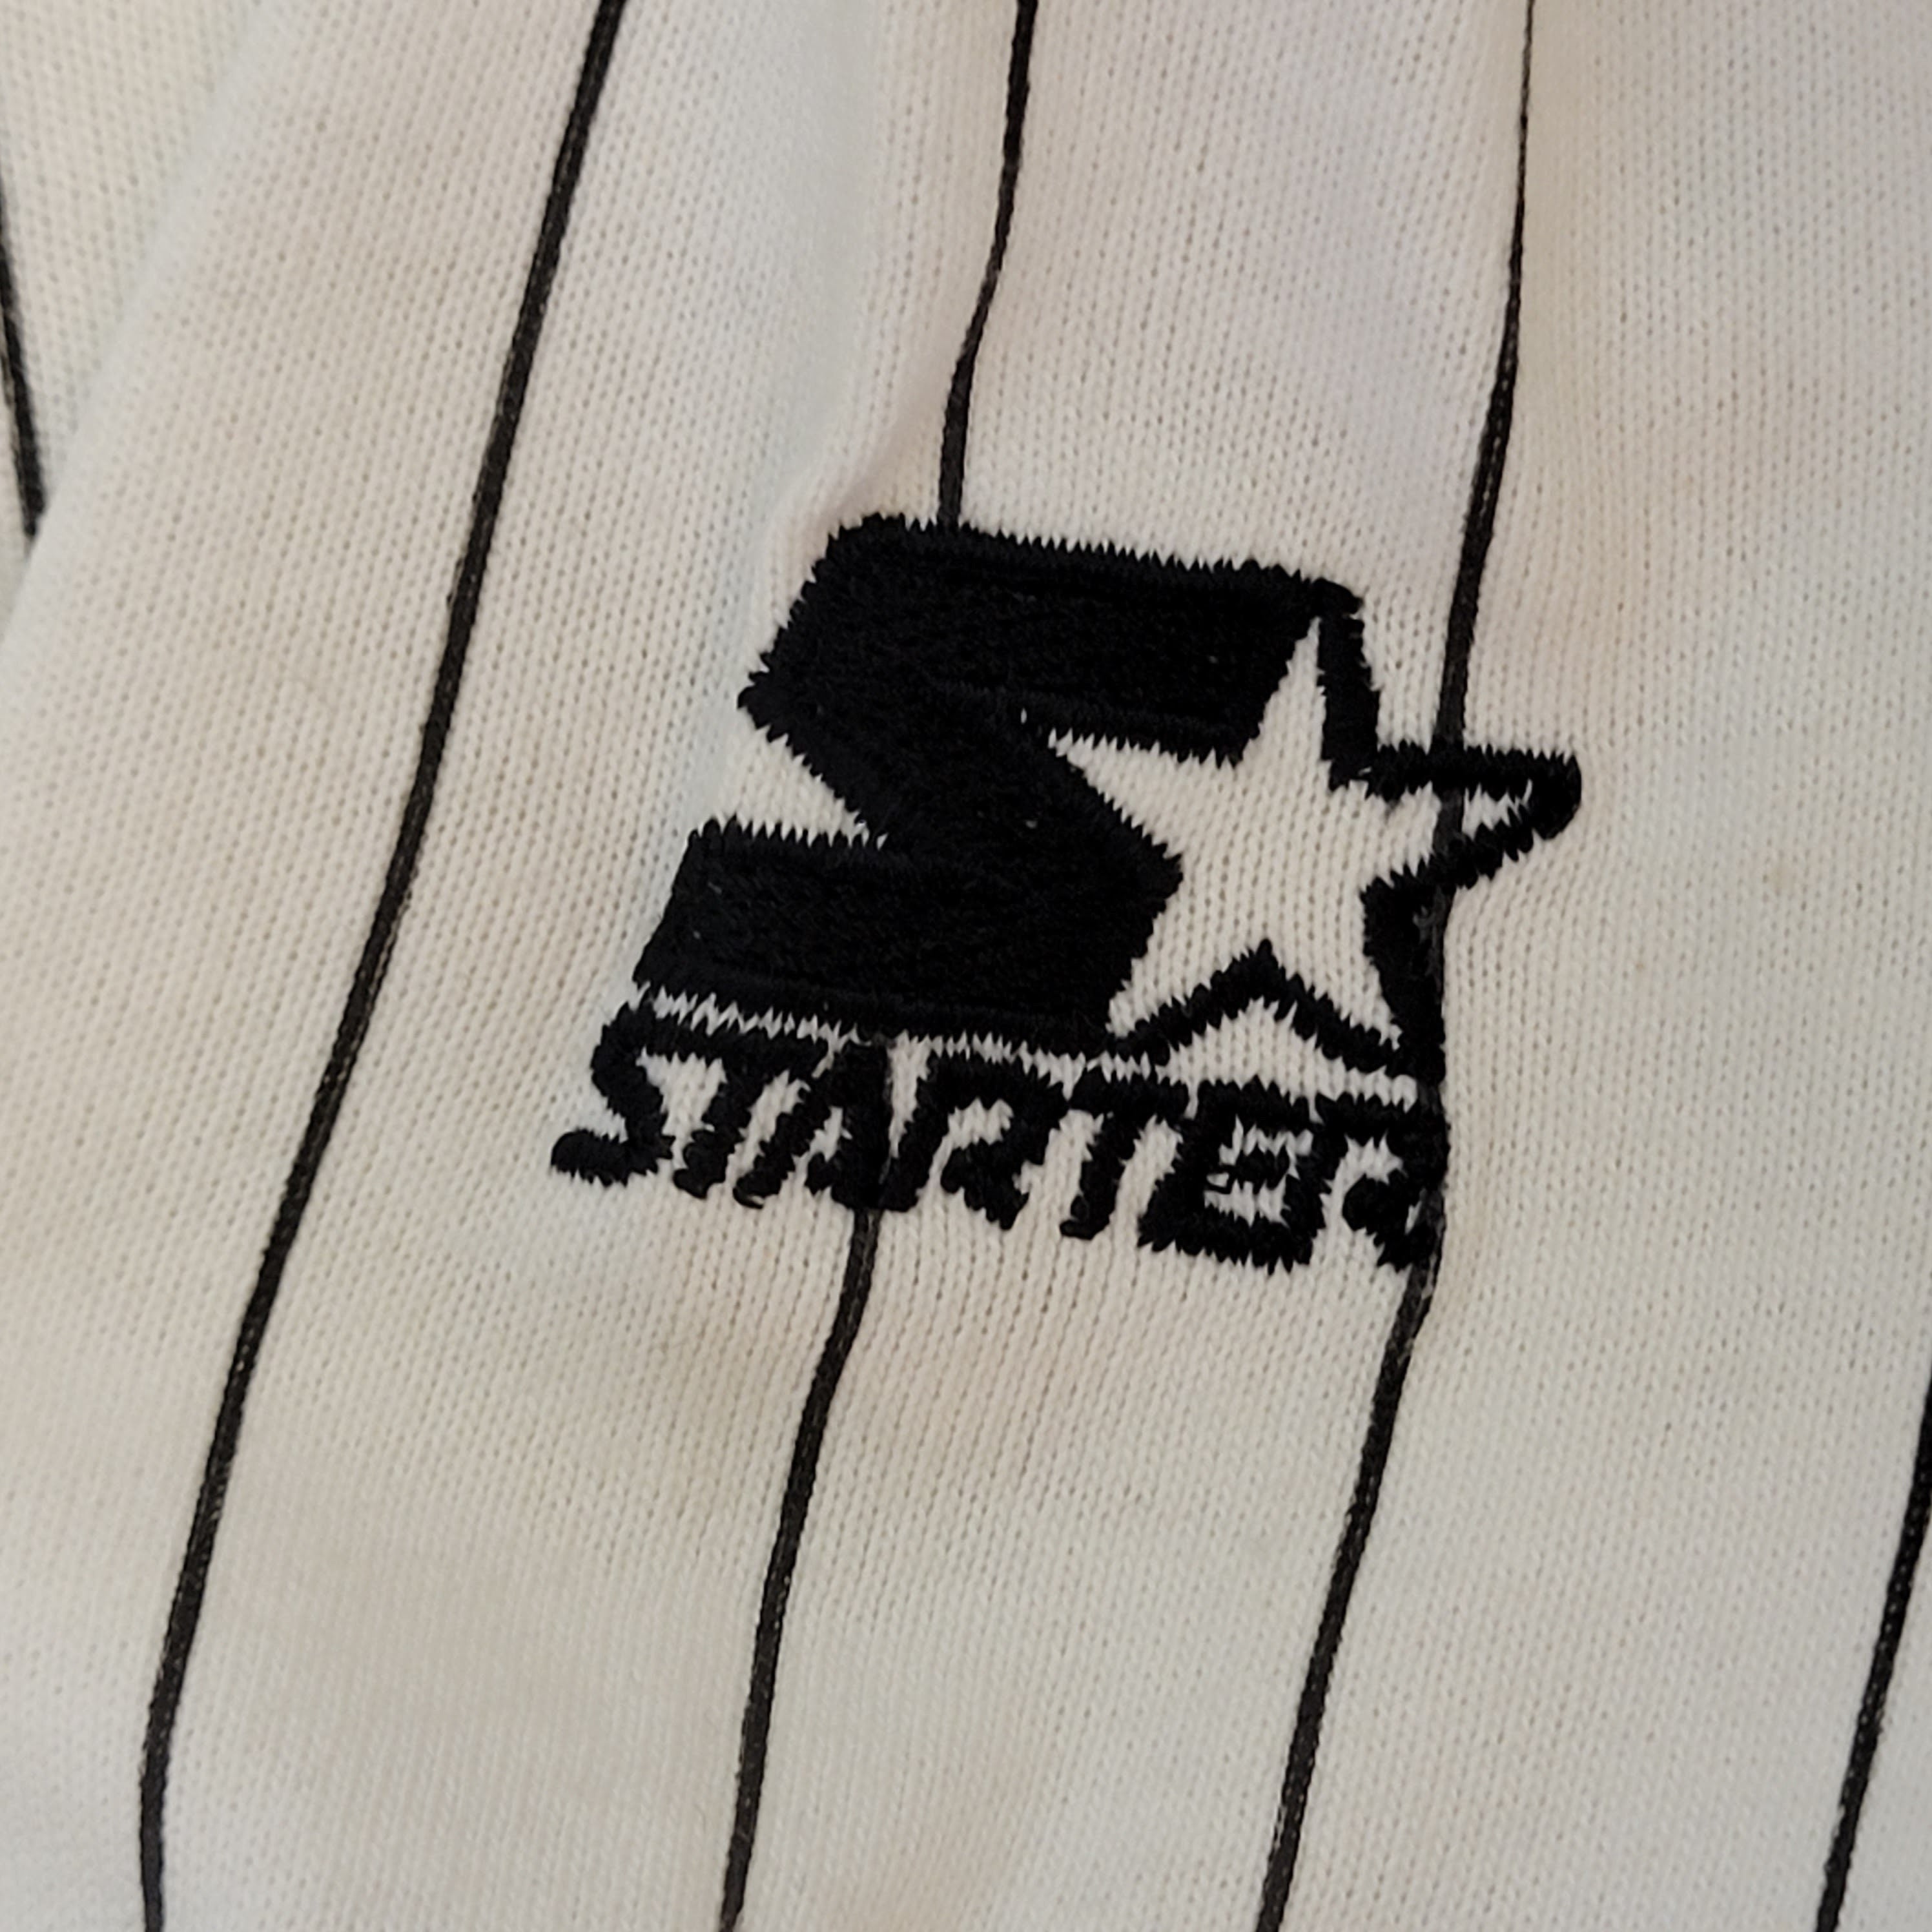 Vintage Starter Cooperstown Collection 1919 Chicago White Sox Pinstrip